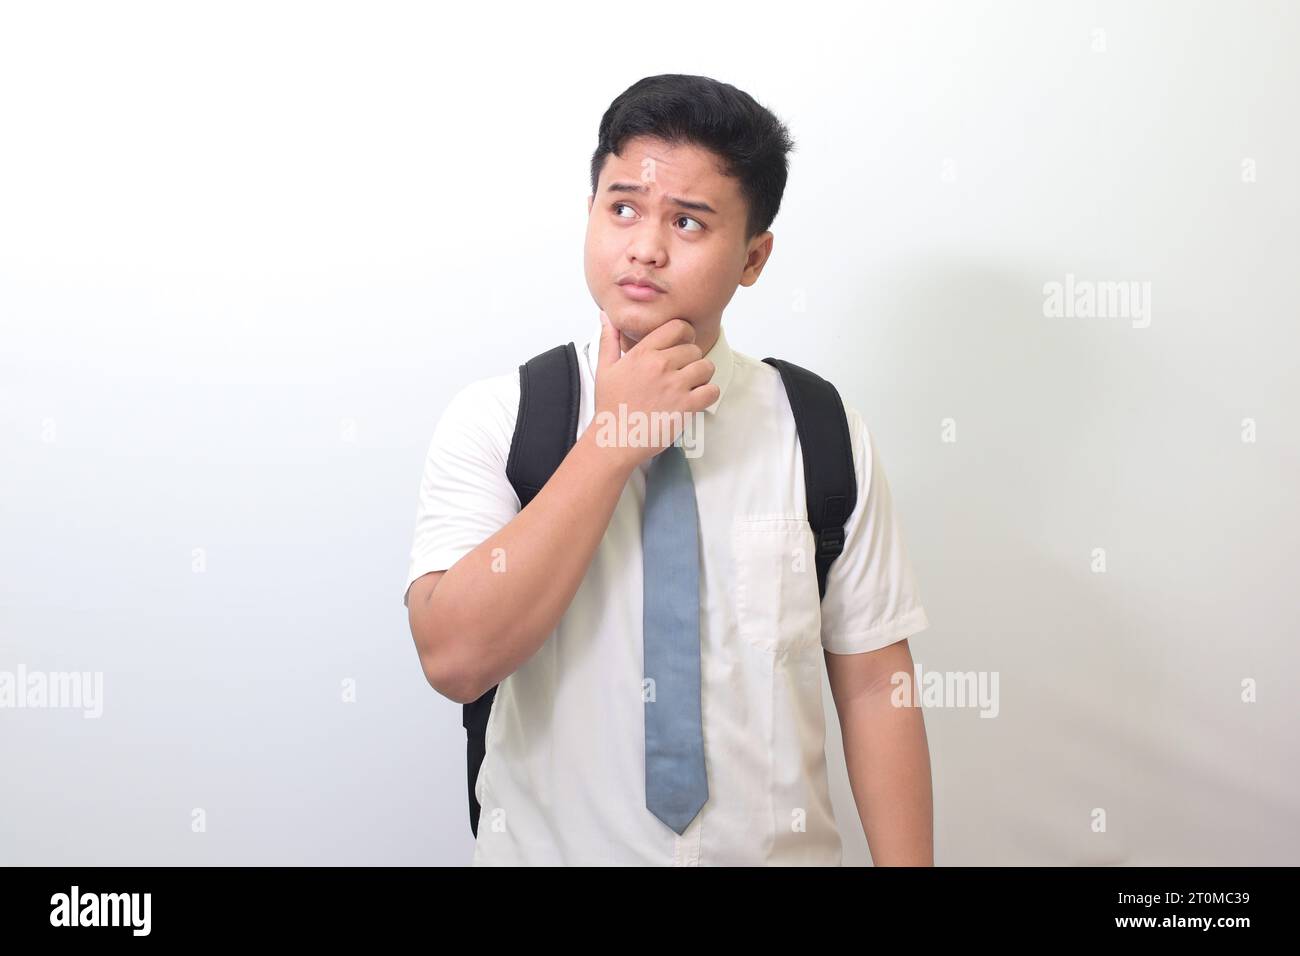 Indonesian senior high school student wearing white shirt uniform with gray tie and thinking about question with hand on chin. Isolated image on white Stock Photo